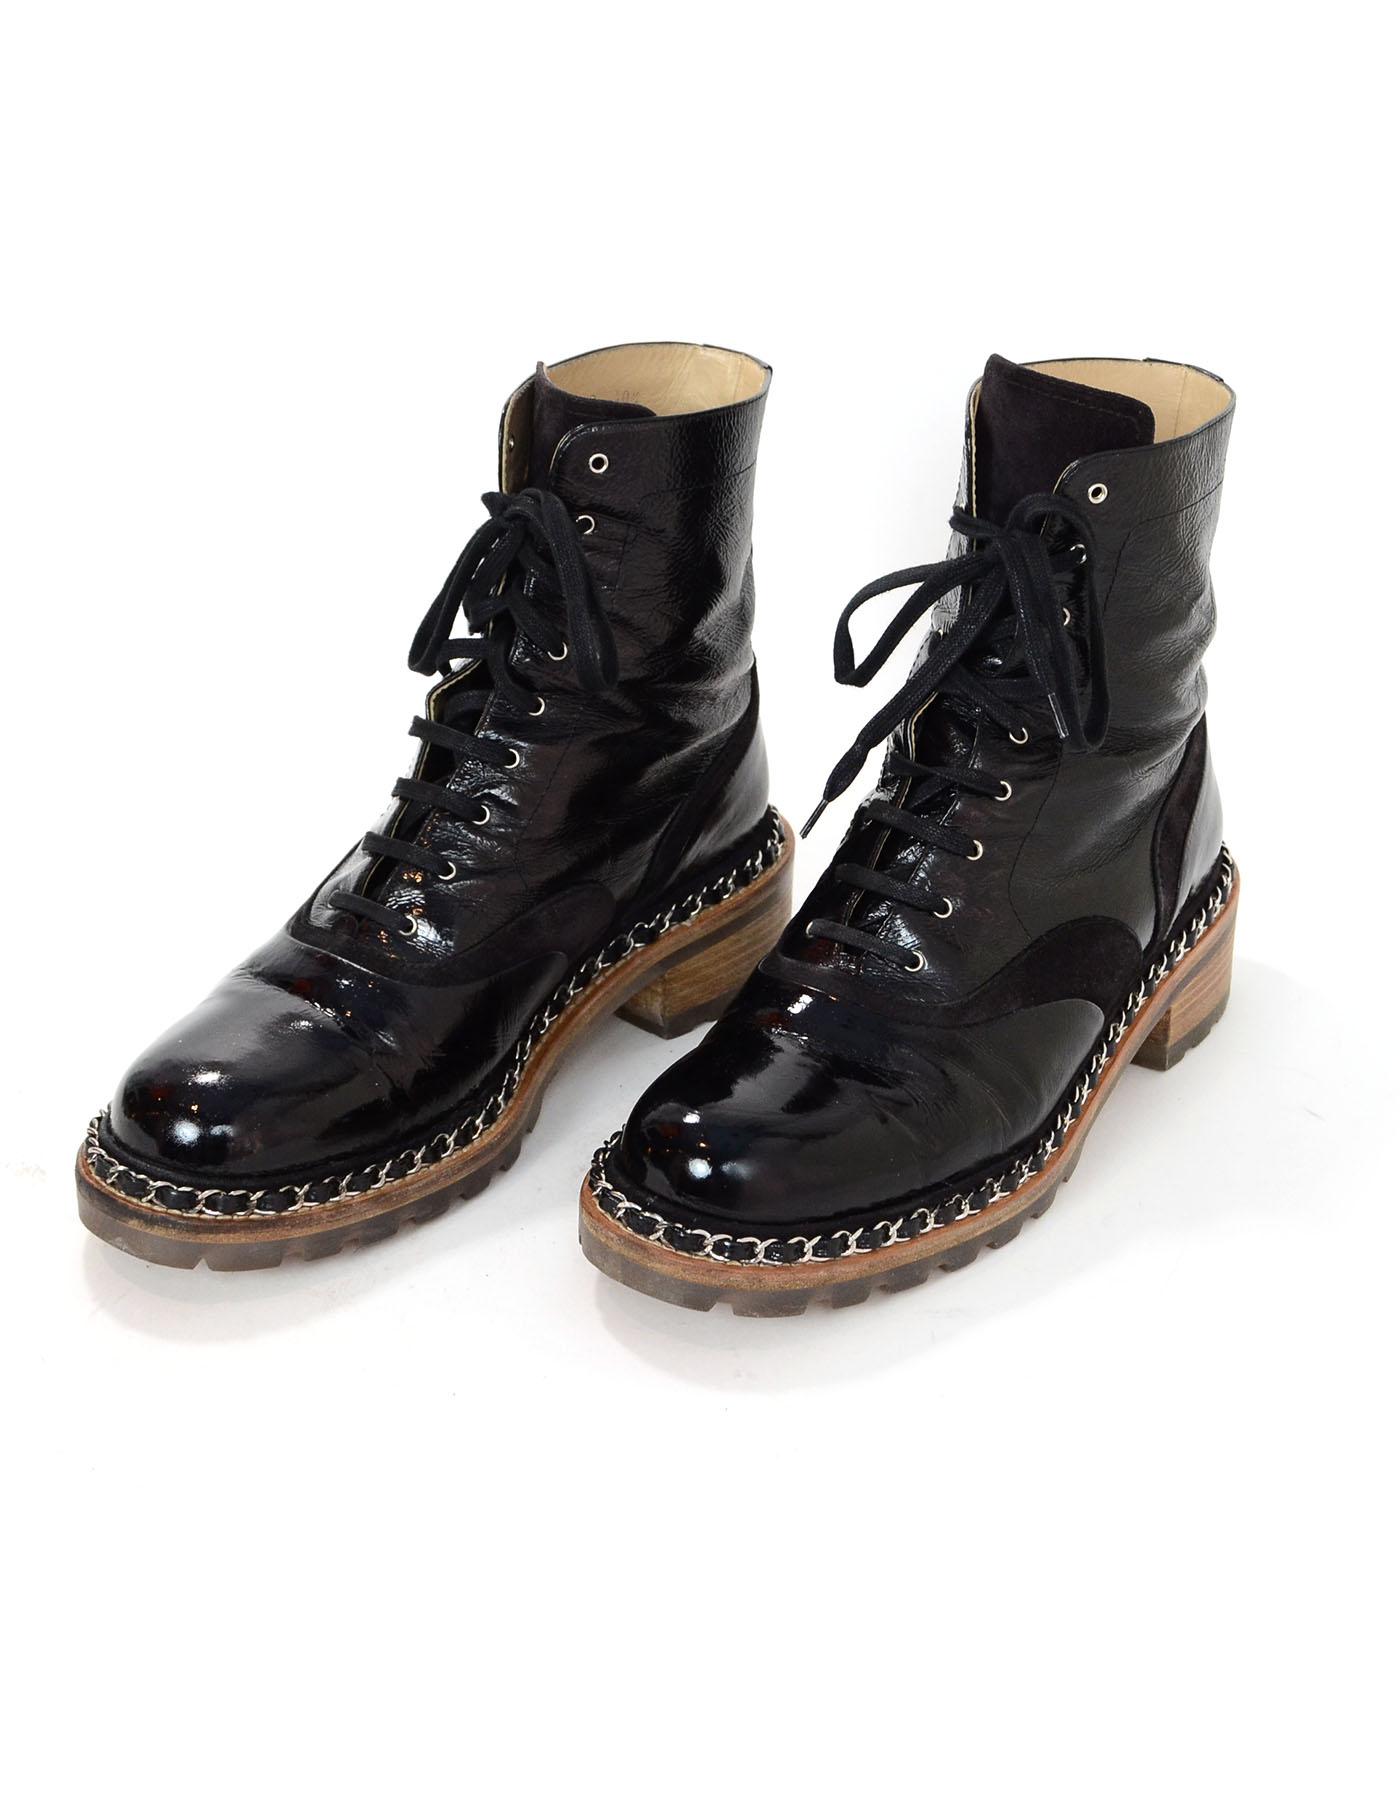 Chanel Black Patent & Chain Trim Boots Sz 40.5

Made In: Italy
Color: Black
Materials: Patent leather, suede
Closure/Opening: Lace tie closure
Sole Stamp: Chanel Made in Italy
Overall Condition: Excellent pre-owned condition with the exception of